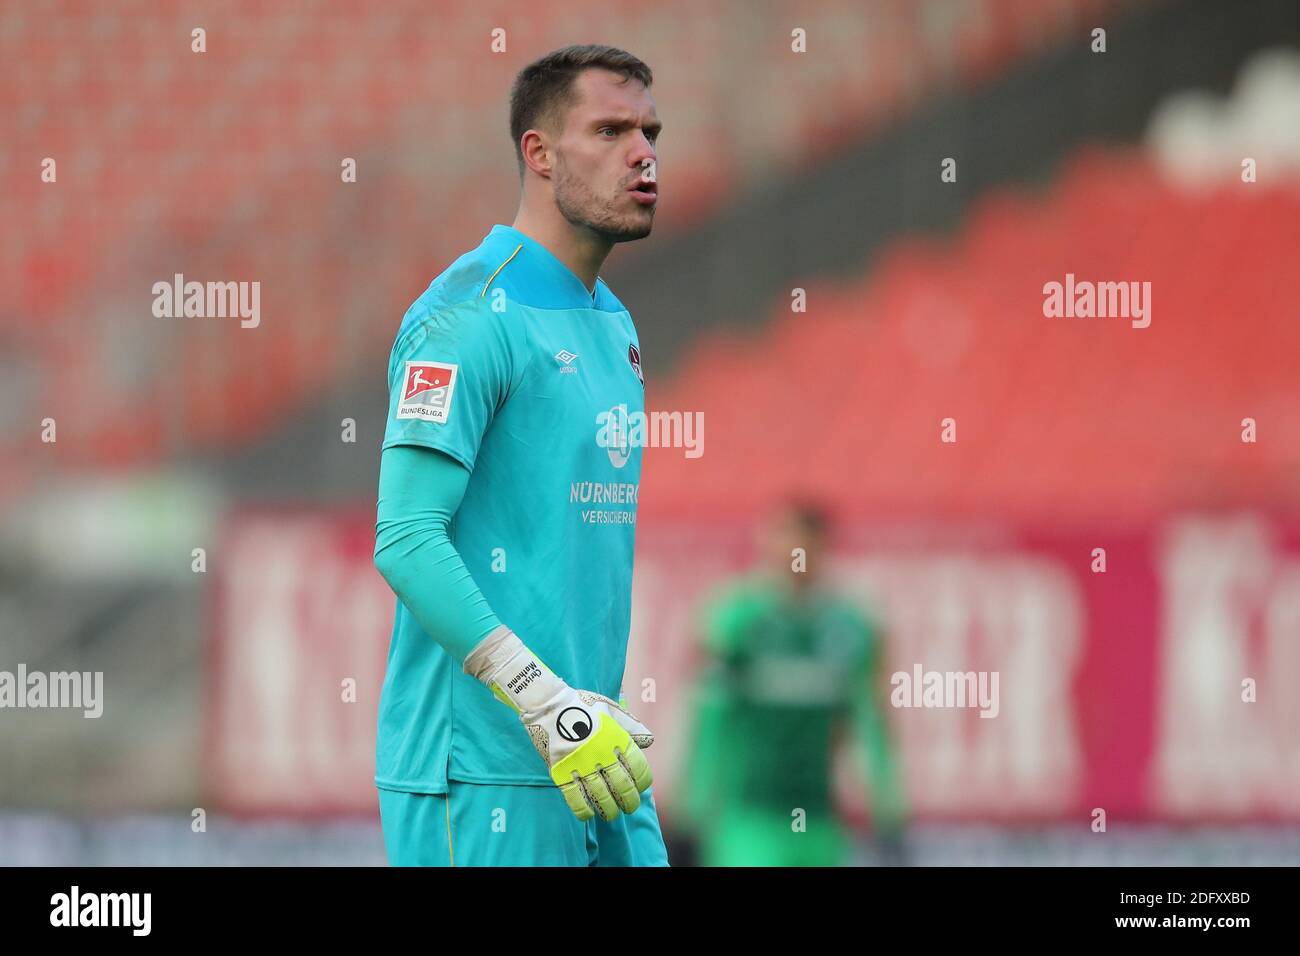 Nuremberg, Germany. 29th Nov, 2020. Football: 2nd Bundesliga, 1st FC Nürnberg - SpVgg Greuther Fürth, 9th matchday at the Max Morlock Stadium. The Nuremberg goalkeeper Christian Mathenia. Credit: Daniel Karmann/dpa - IMPORTANT NOTE: In accordance with the regulations of the DFL Deutsche Fußball Liga and the DFB Deutscher Fußball-Bund, it is prohibited to exploit or have exploited in the stadium and/or from the game taken photographs in the form of sequence images and/or video-like photo series./dpa/Alamy Live News Stock Photo